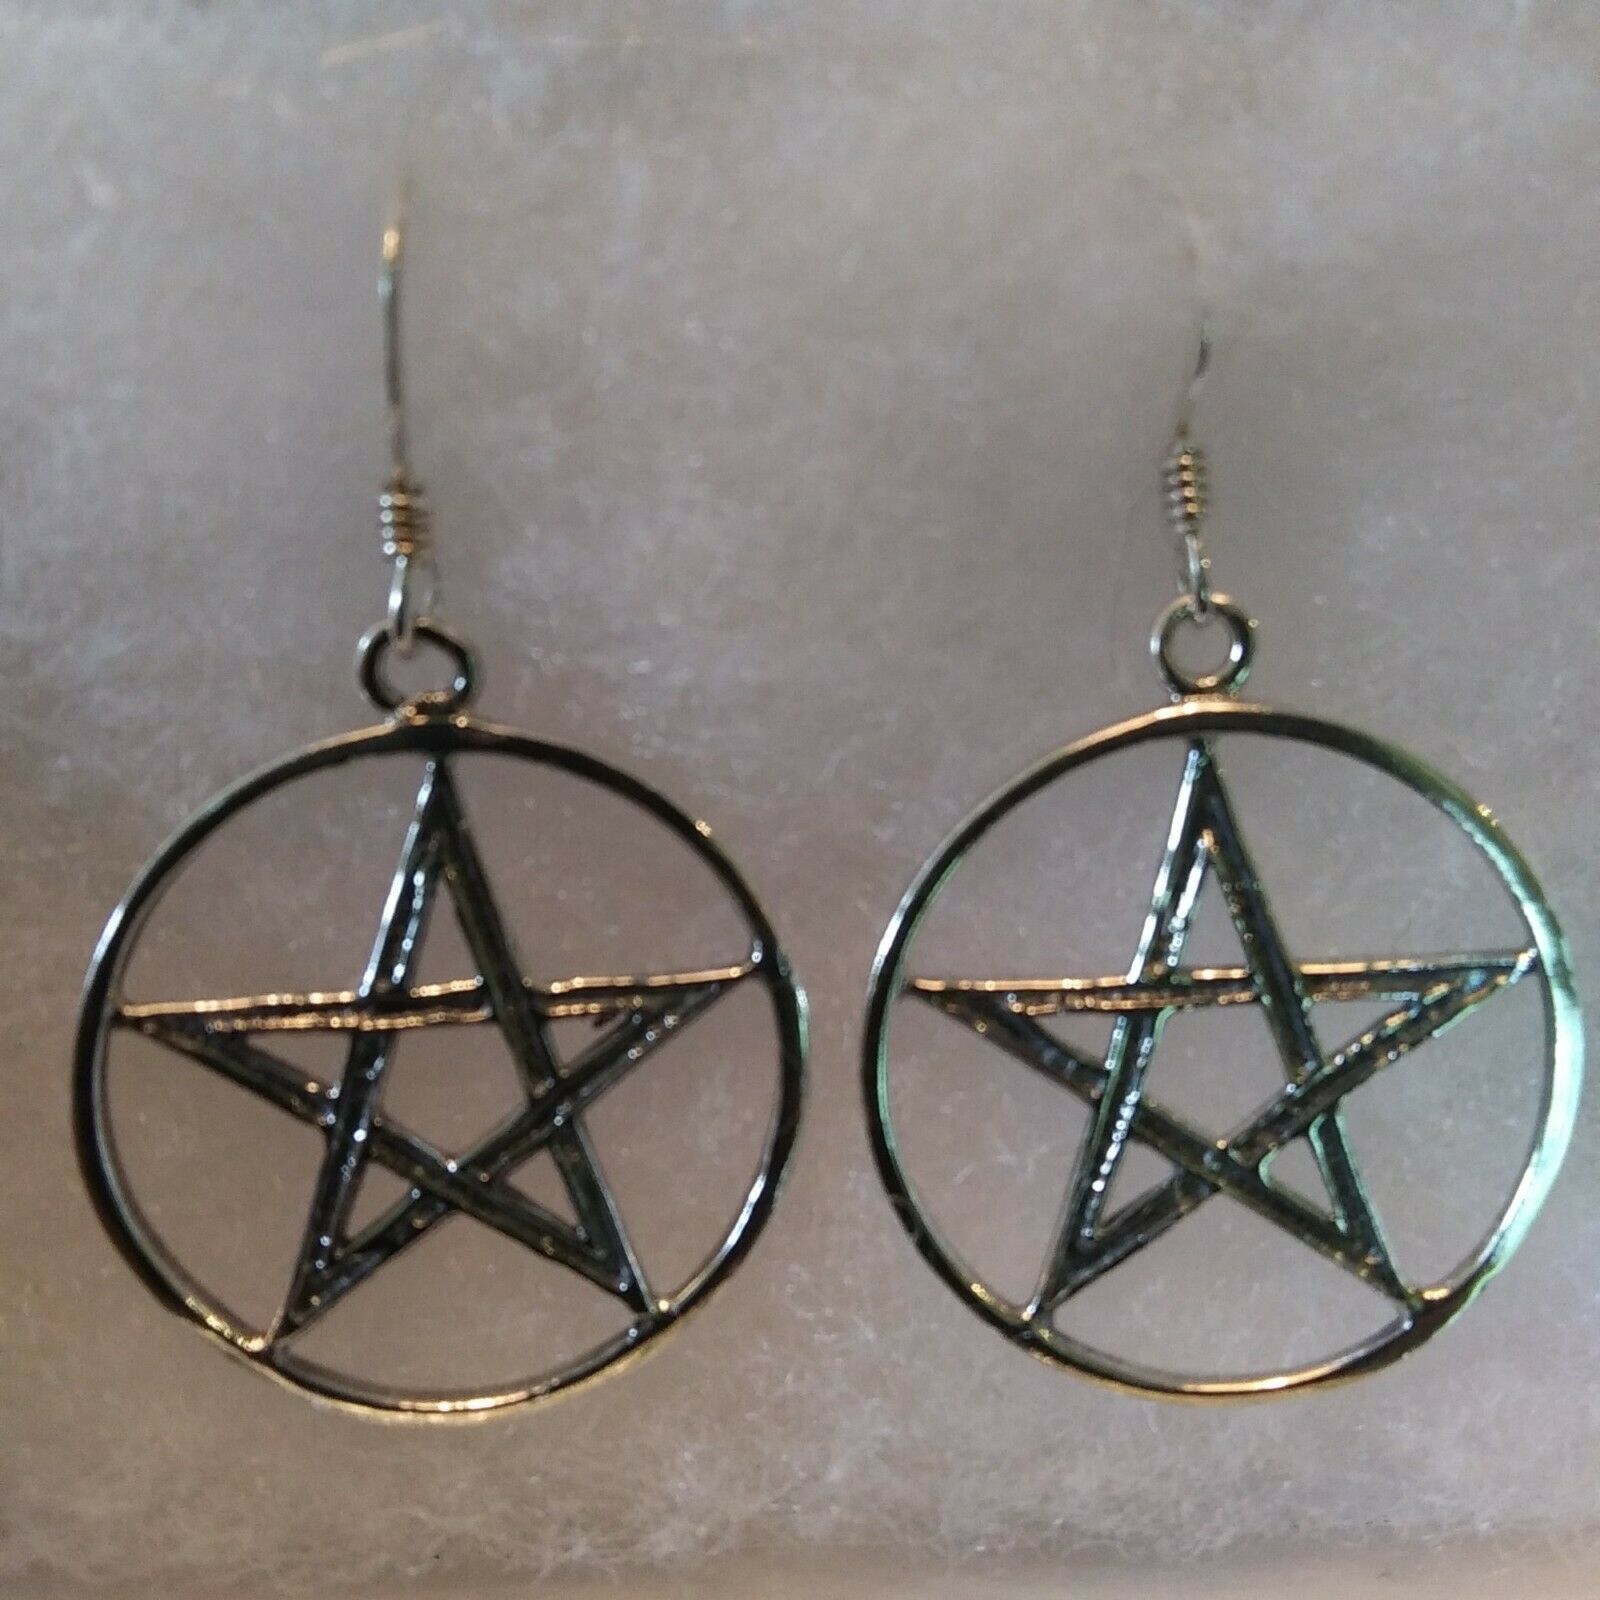 Pentacle Earrings Small Unique Gothic Sterling Silver Wicca  1"